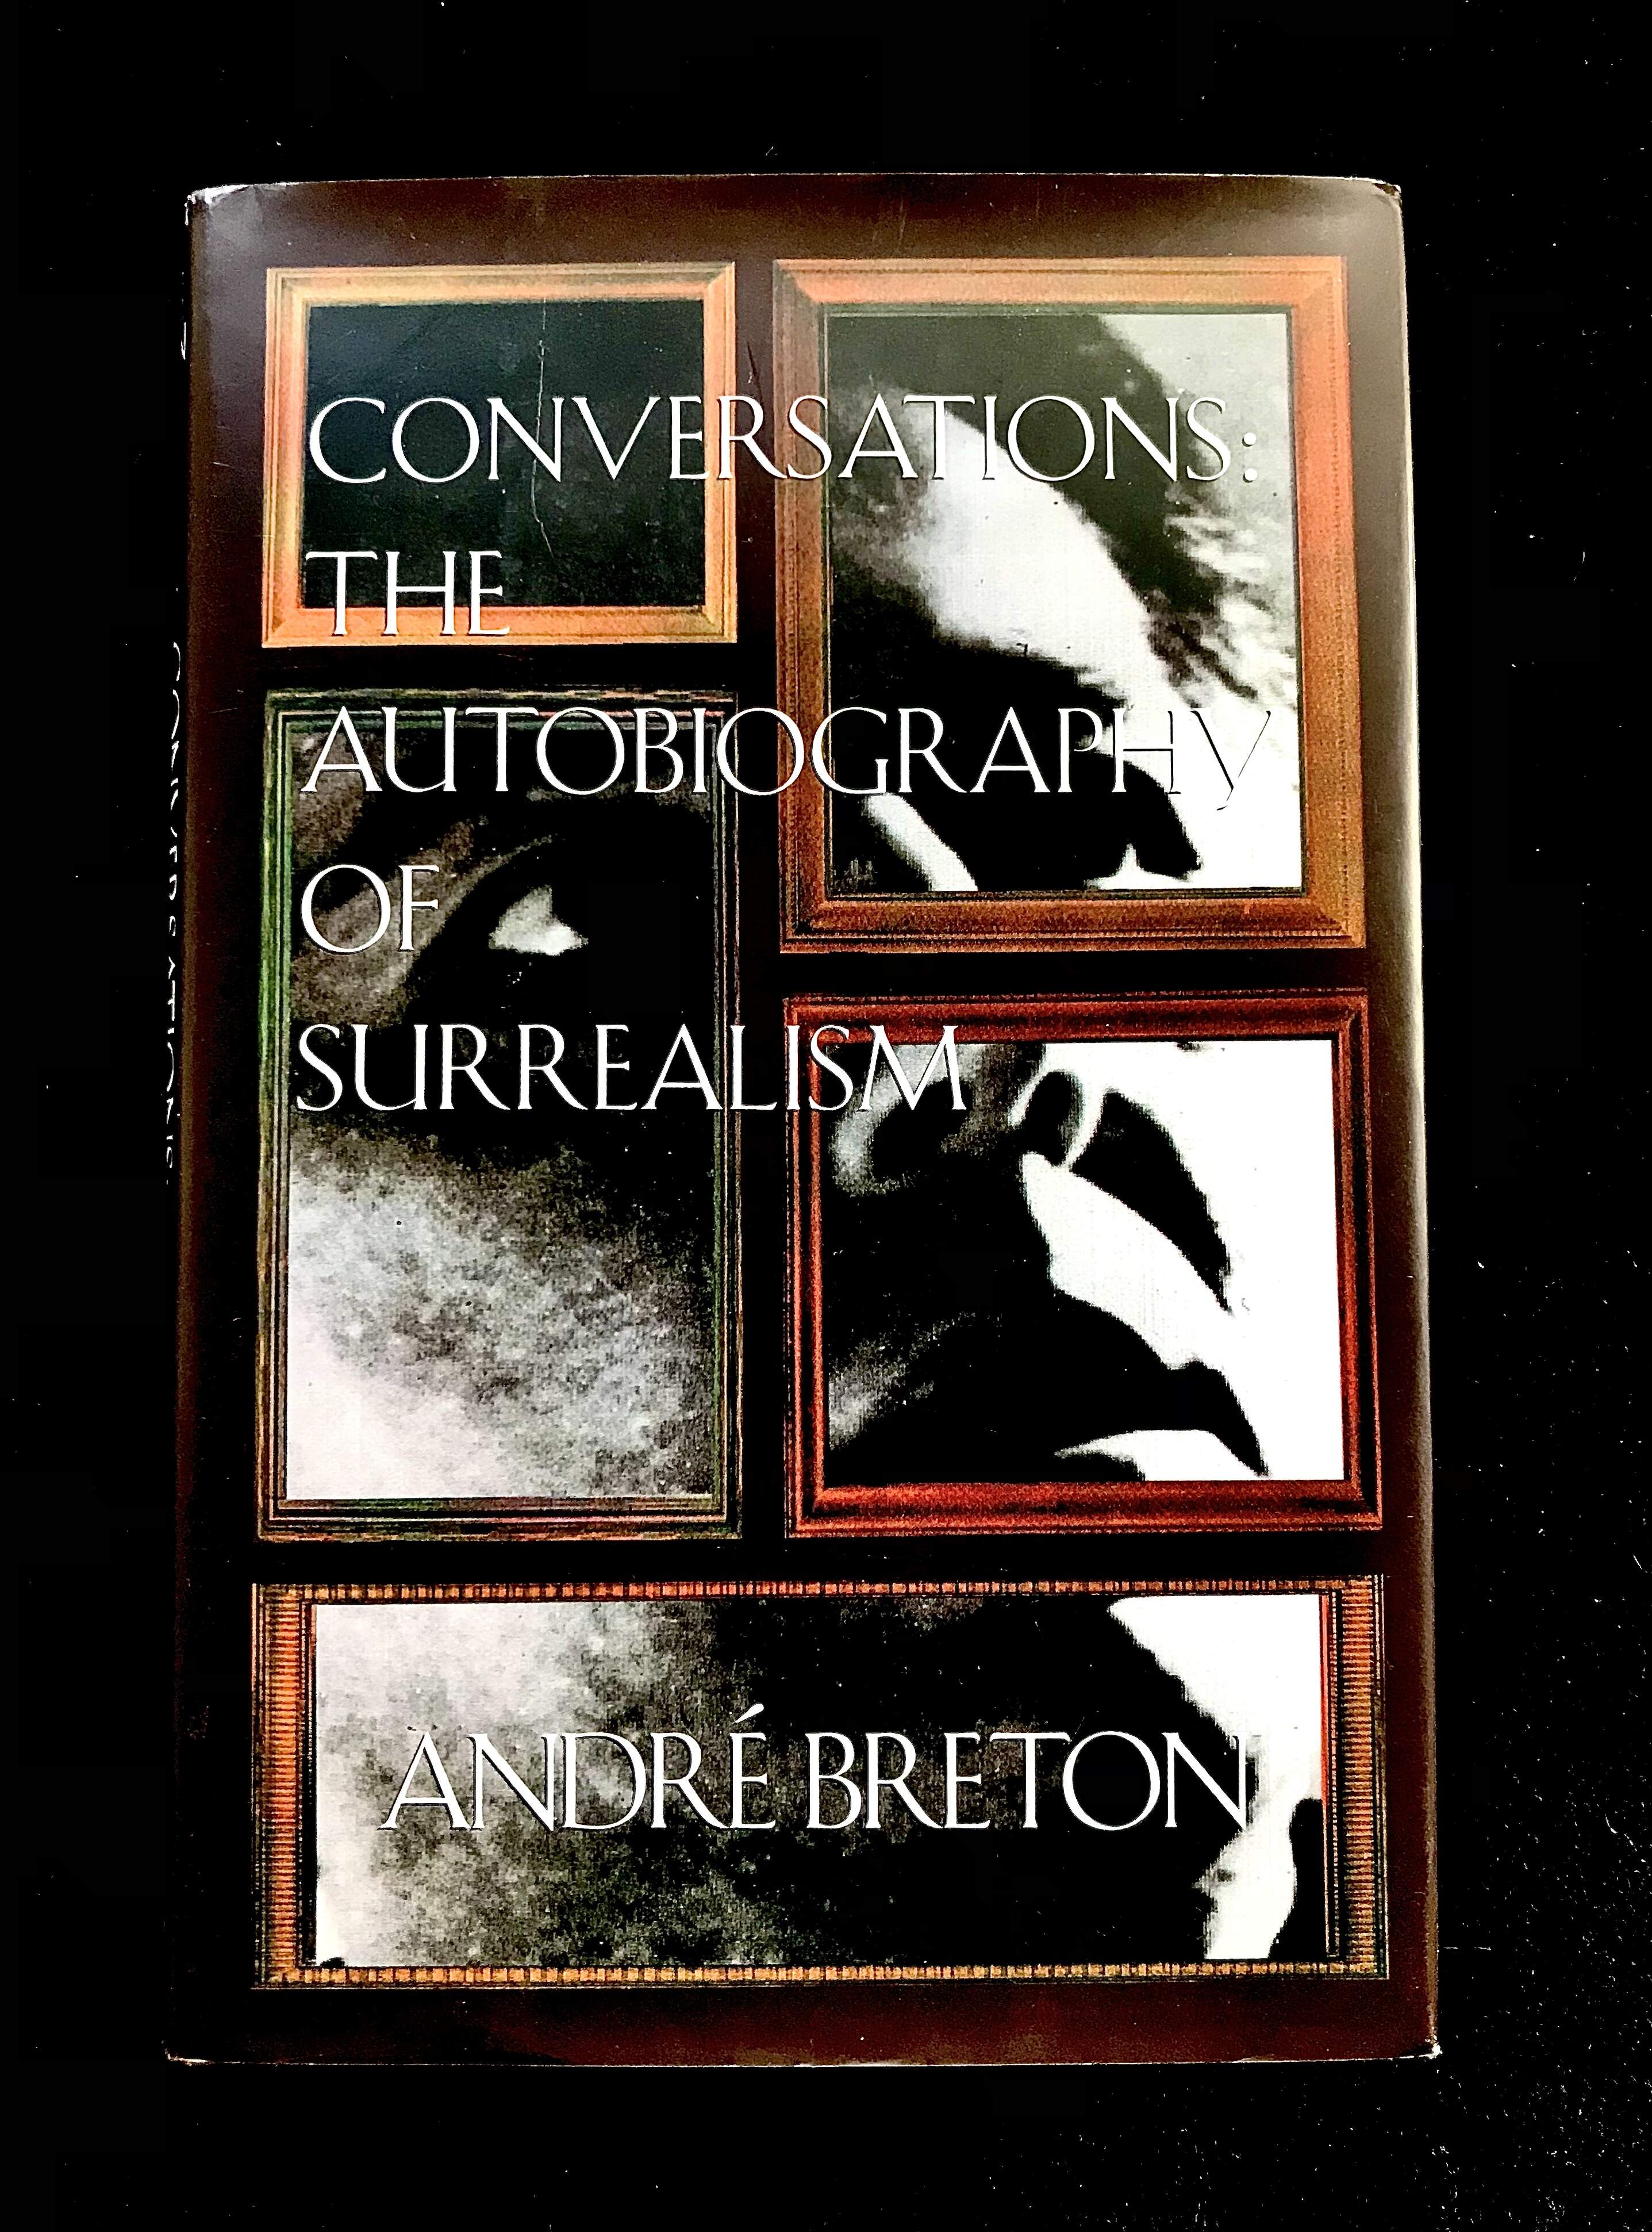 Conversations: The Autobiography Of Surrealism by Andre Breton